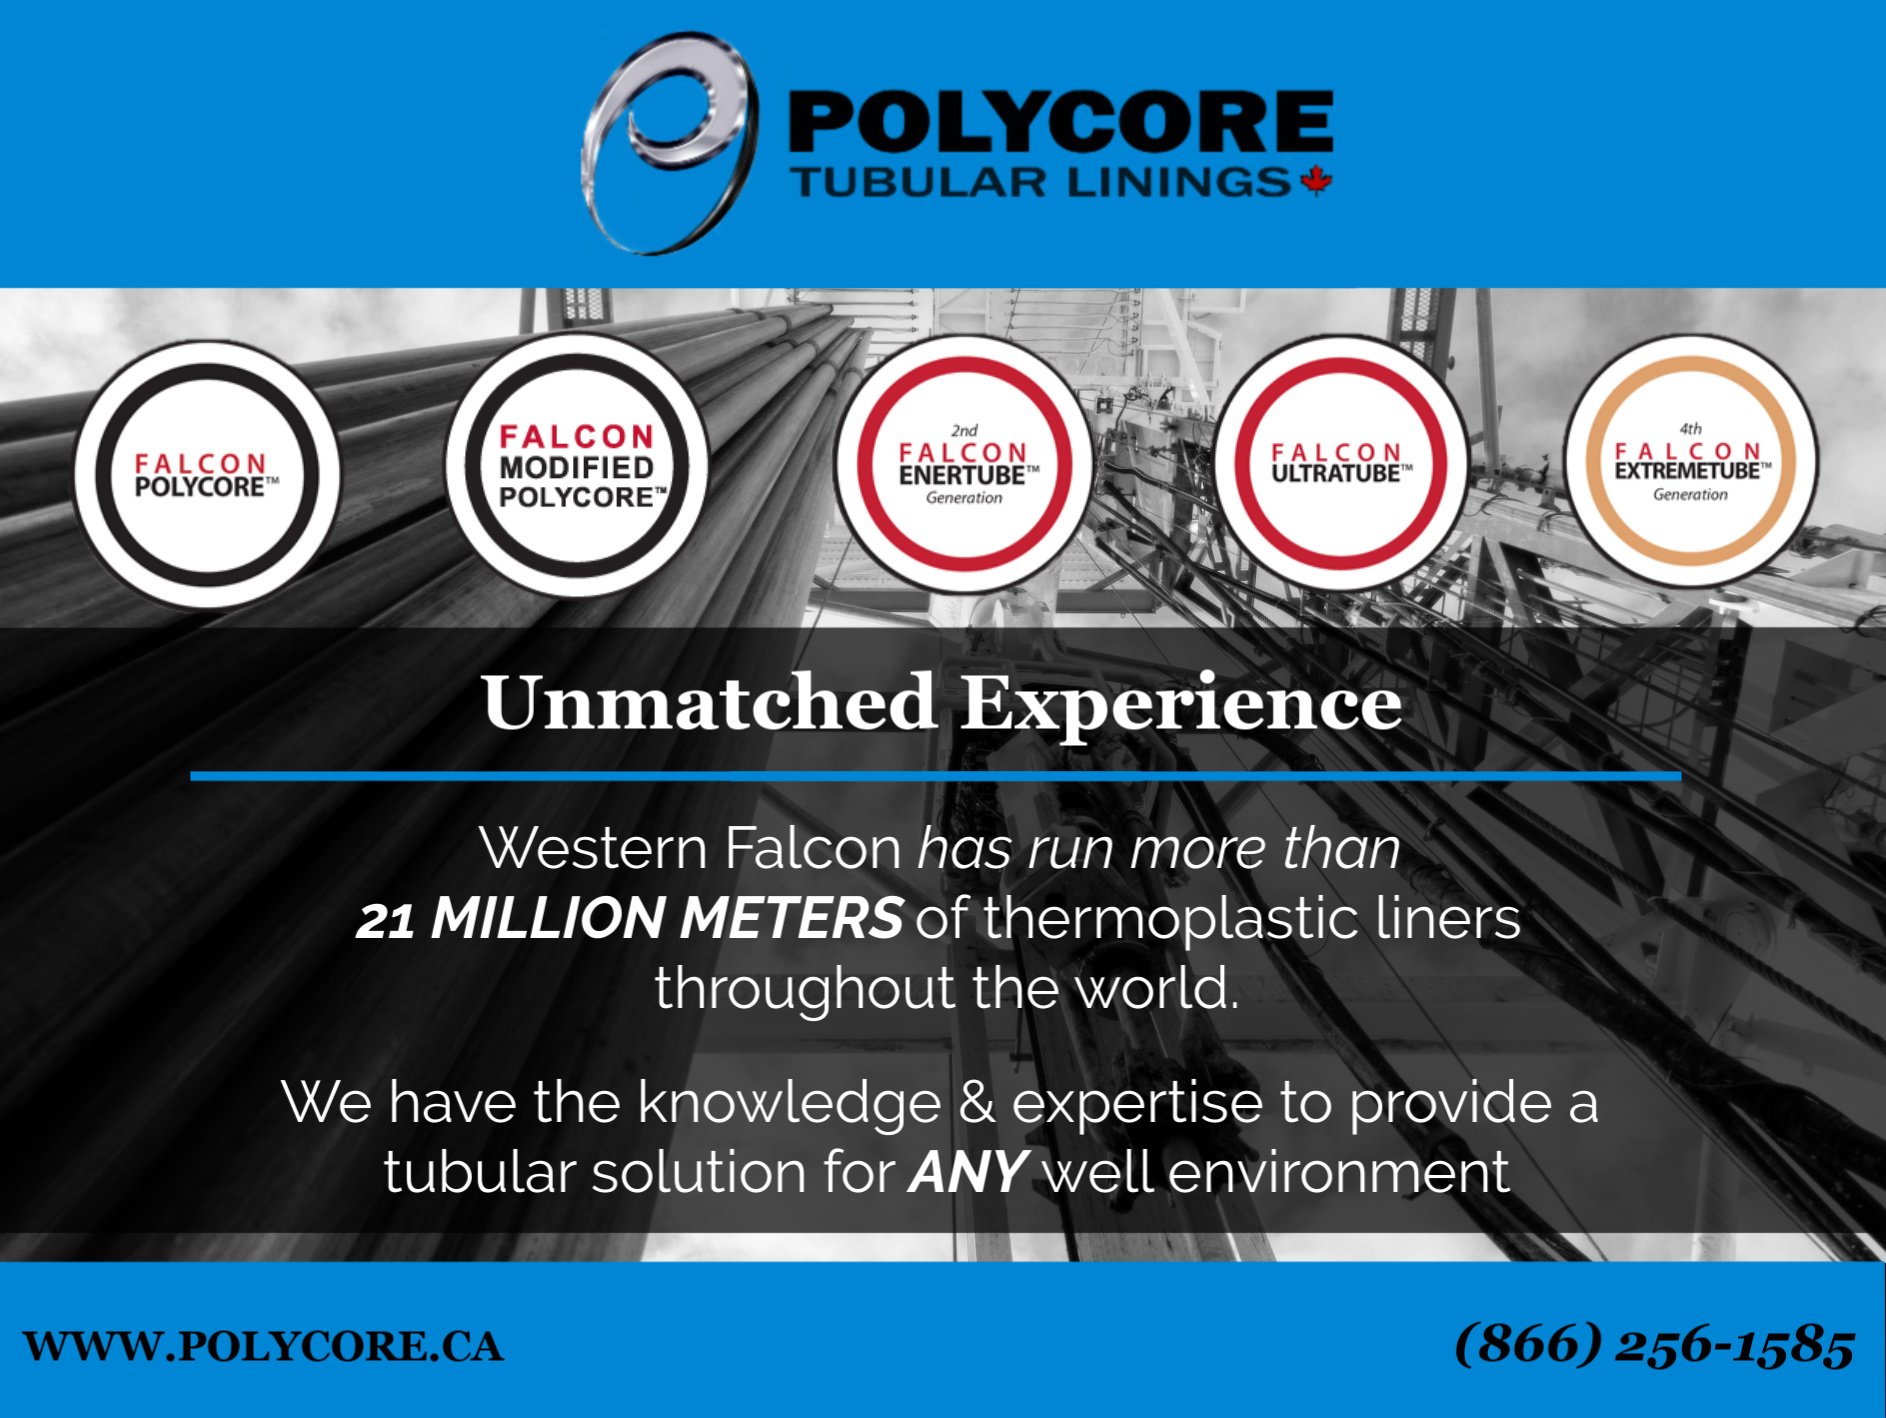 Firefighter rough Appraisal Polycore Tubular Linings (@Polycore_Lining) / Twitter